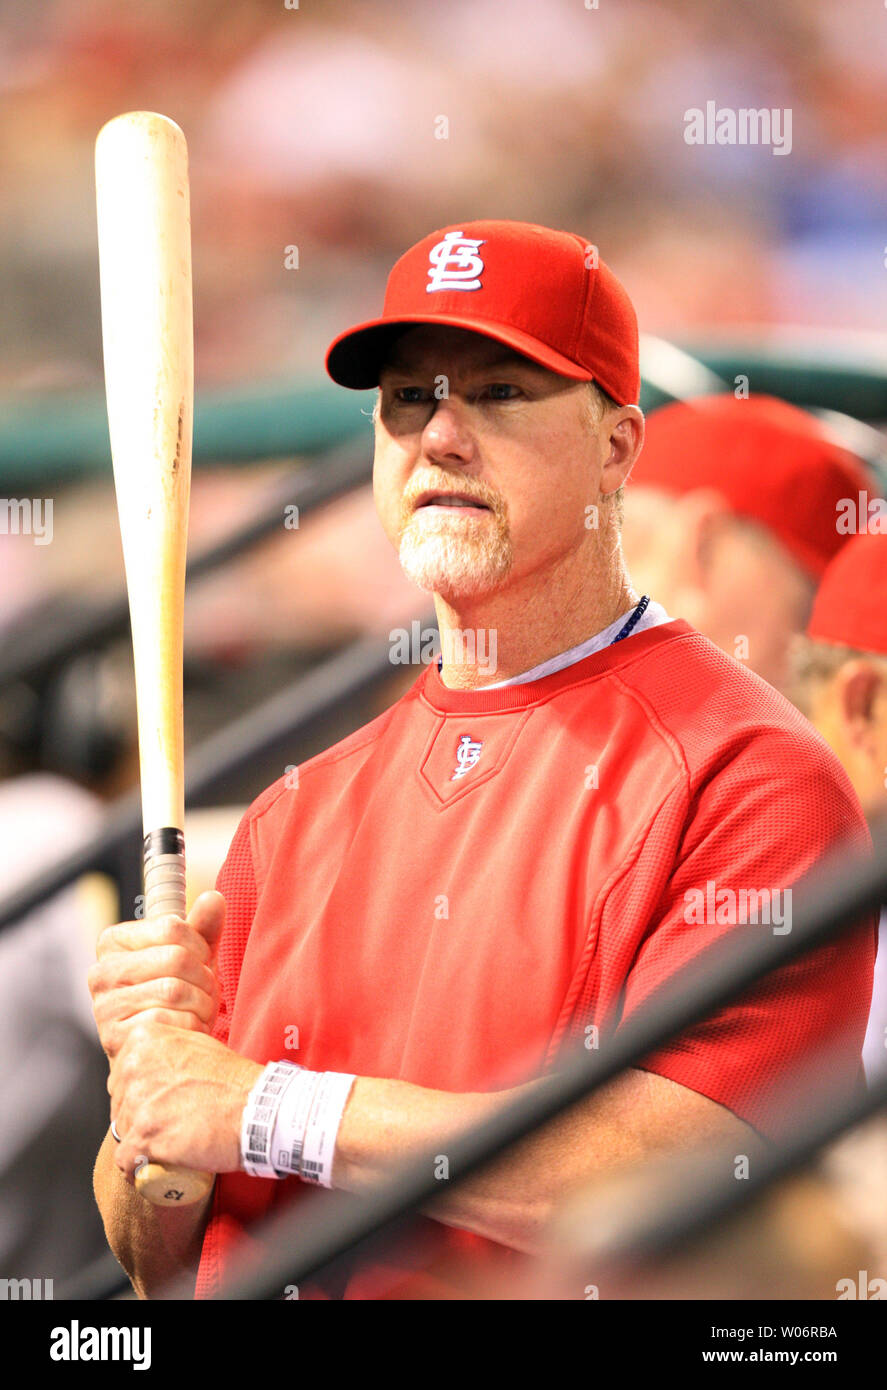 St. Louis Cardinals hitting coach Mark McGwire holds a bat in the